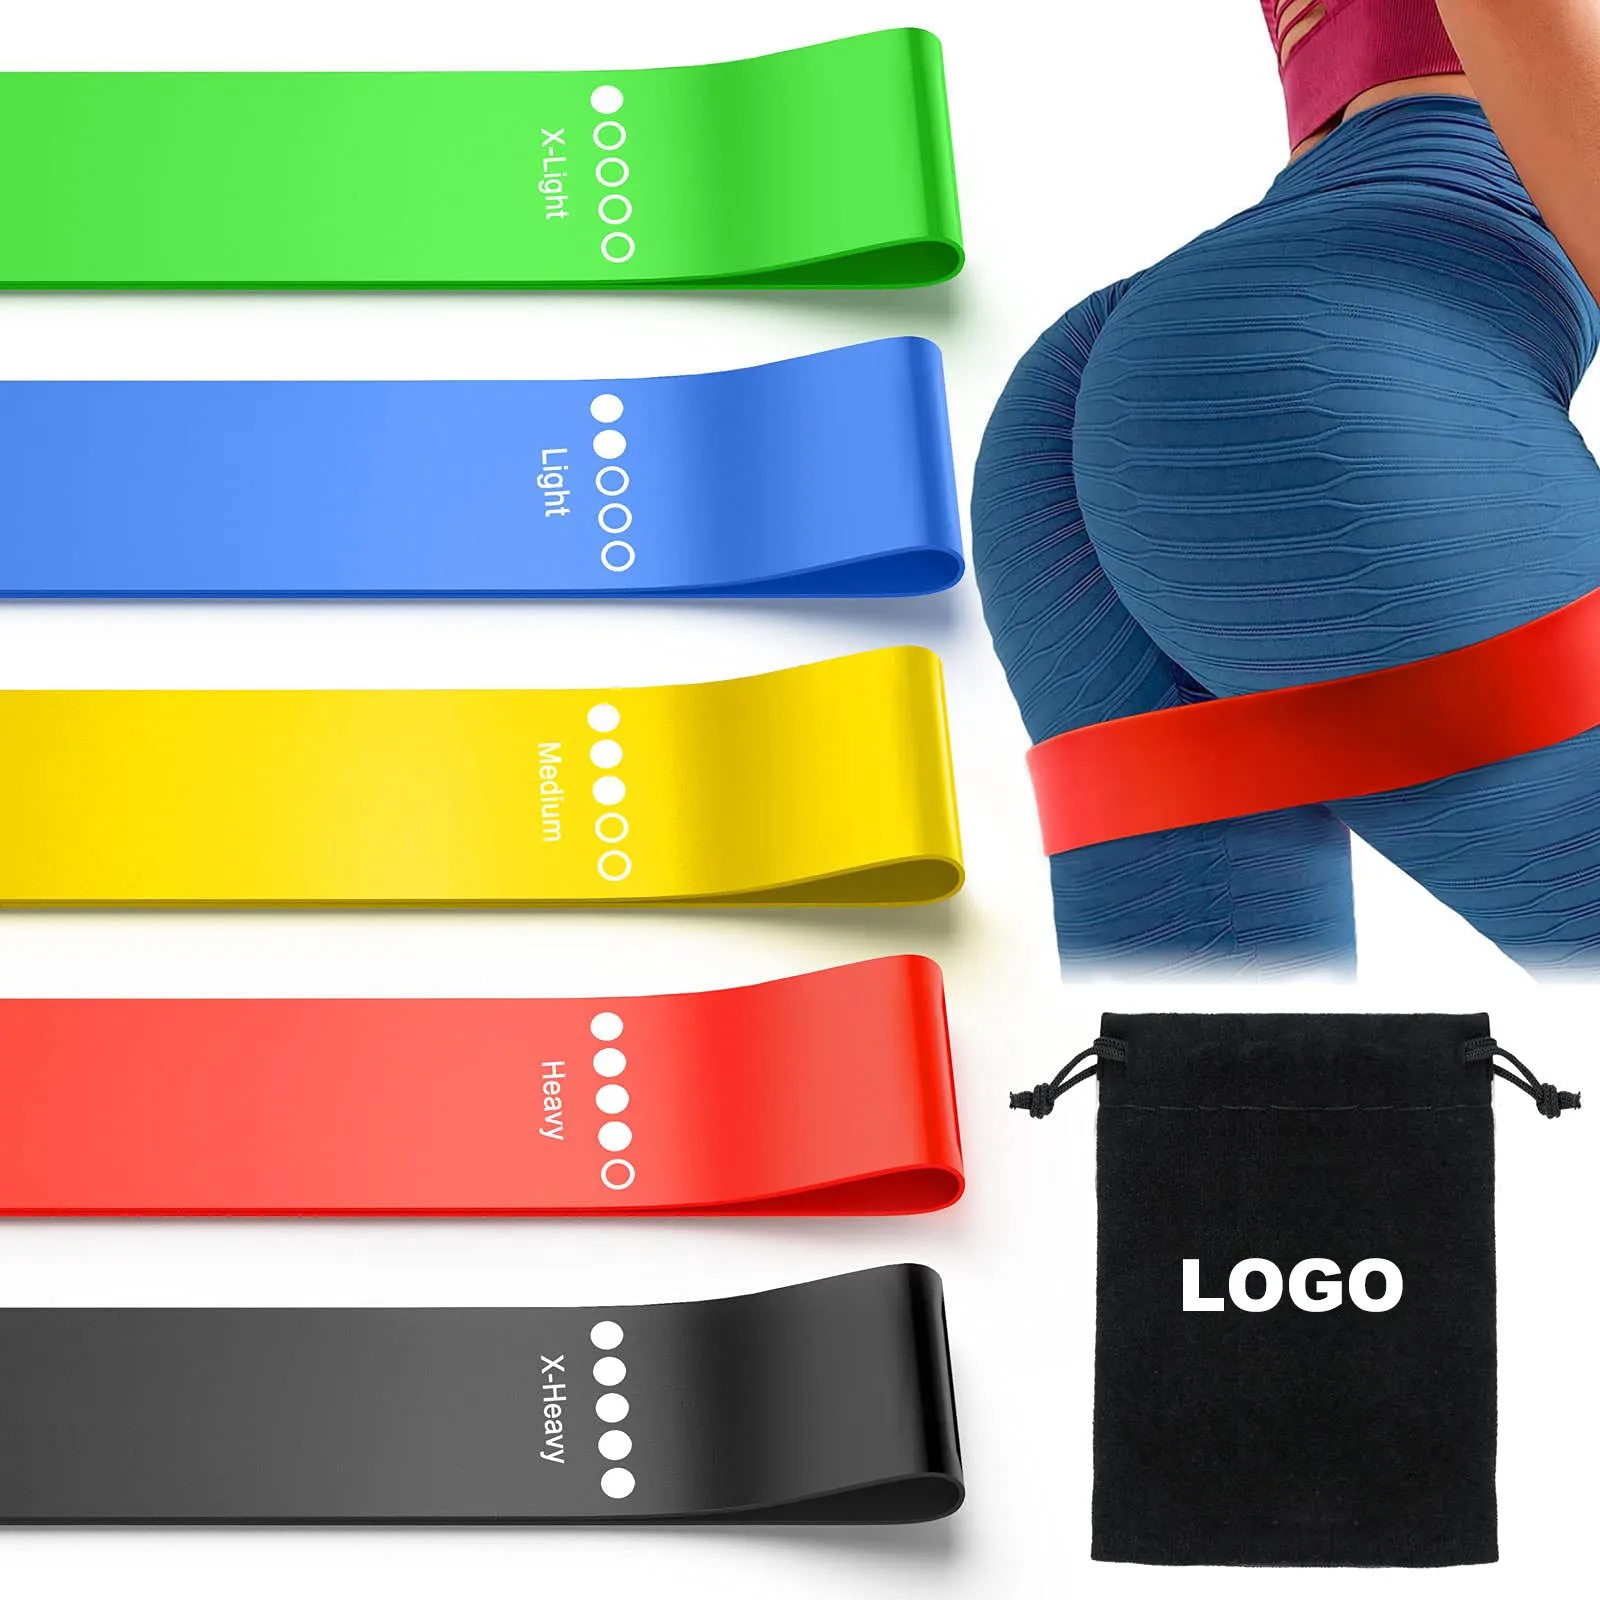 Exercise Gym Training Yoga Resistance Exercise Loop Bands Set of 5 Fitness Elastic Bands for Working Out Resistance Bands